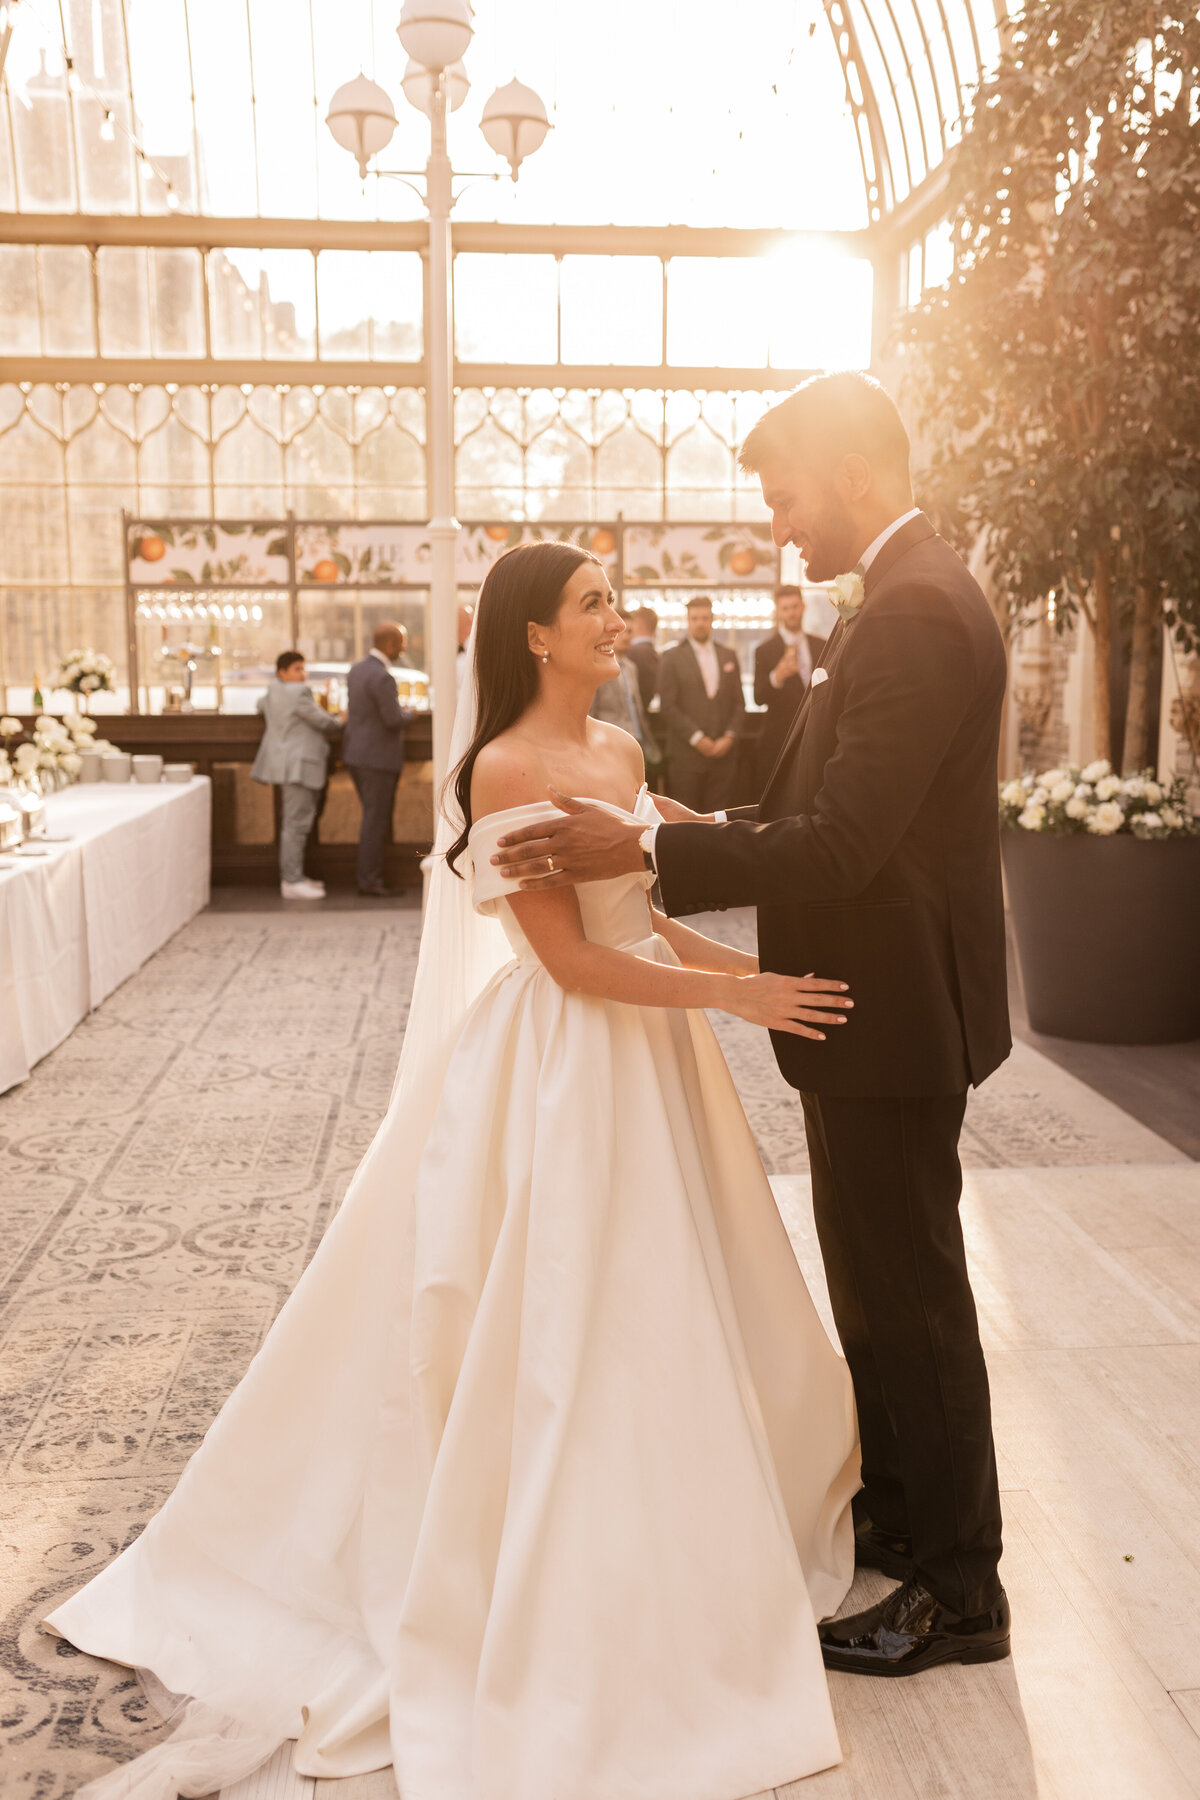 First dance during golden hour in the Orangery at Tortworth Court